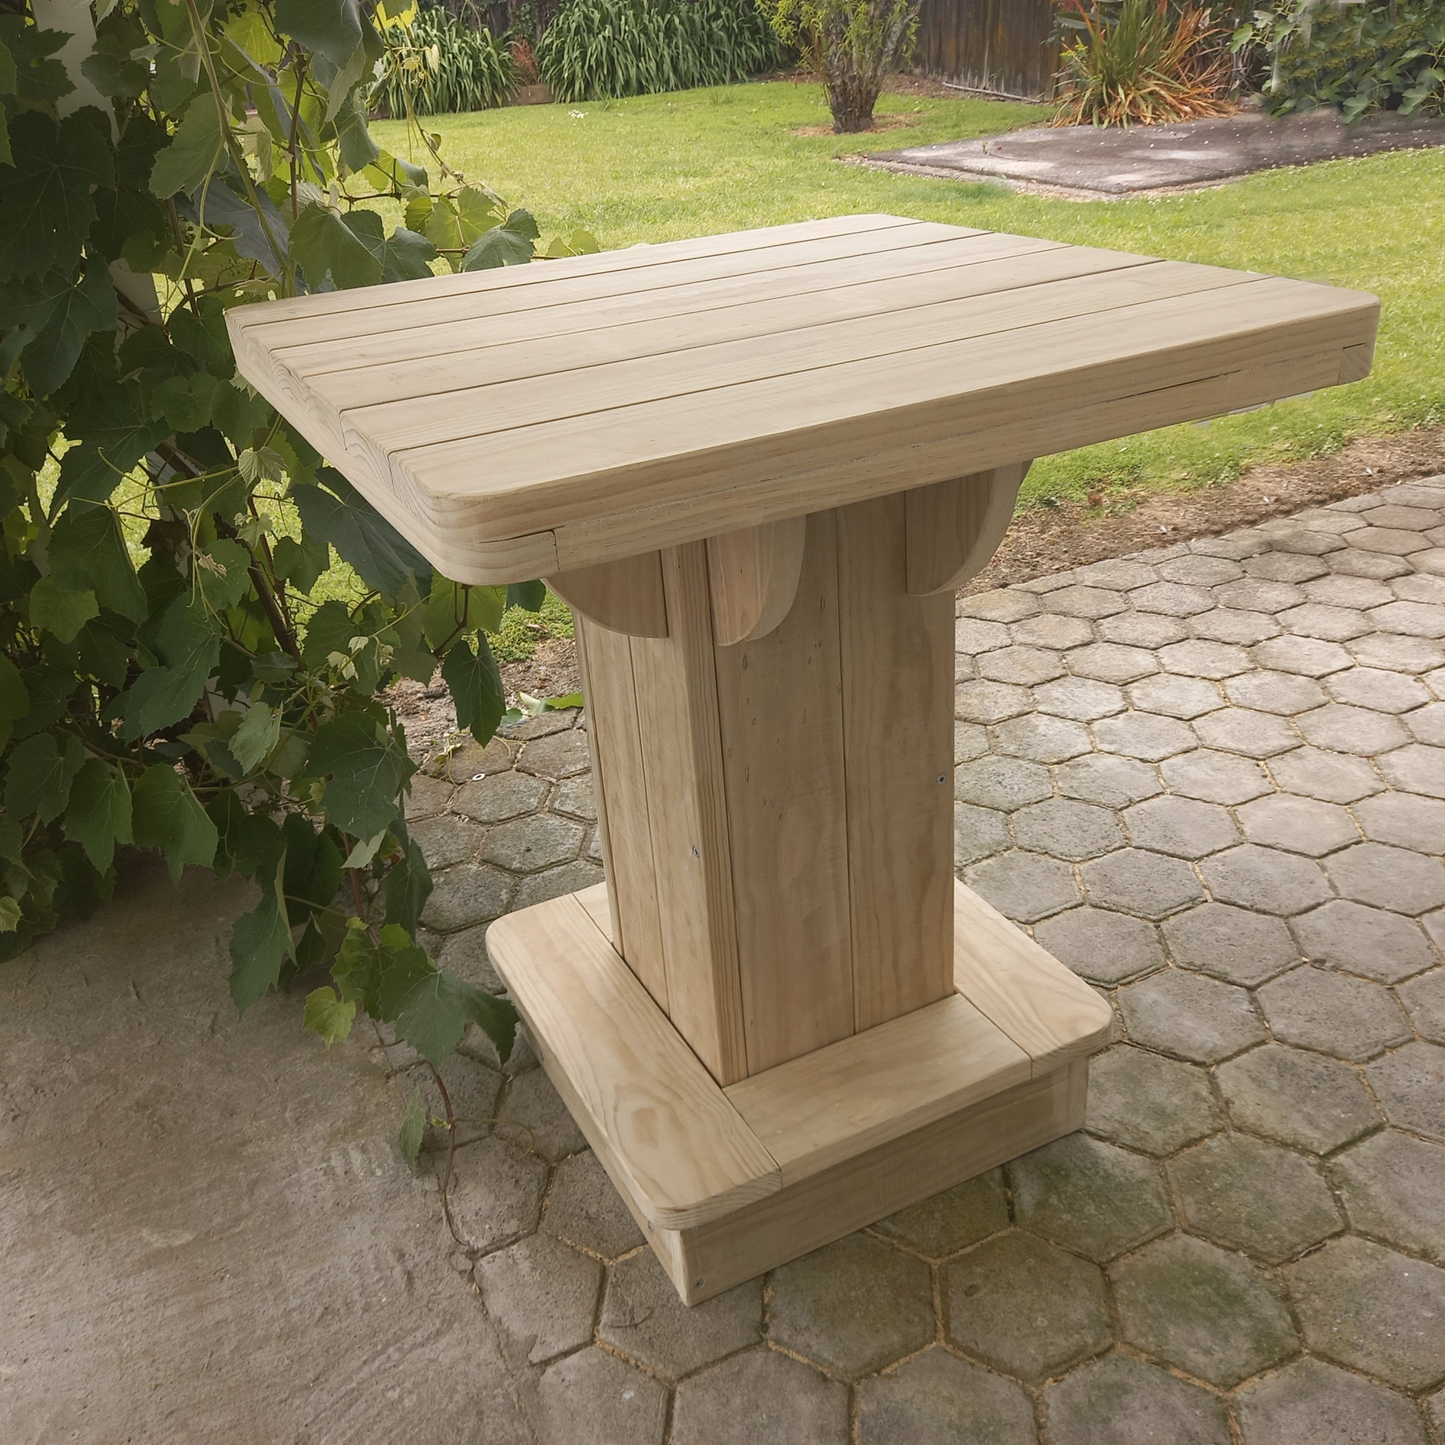 DIY plans to build an outdoor bar or pub table 33 inches (840mm) square